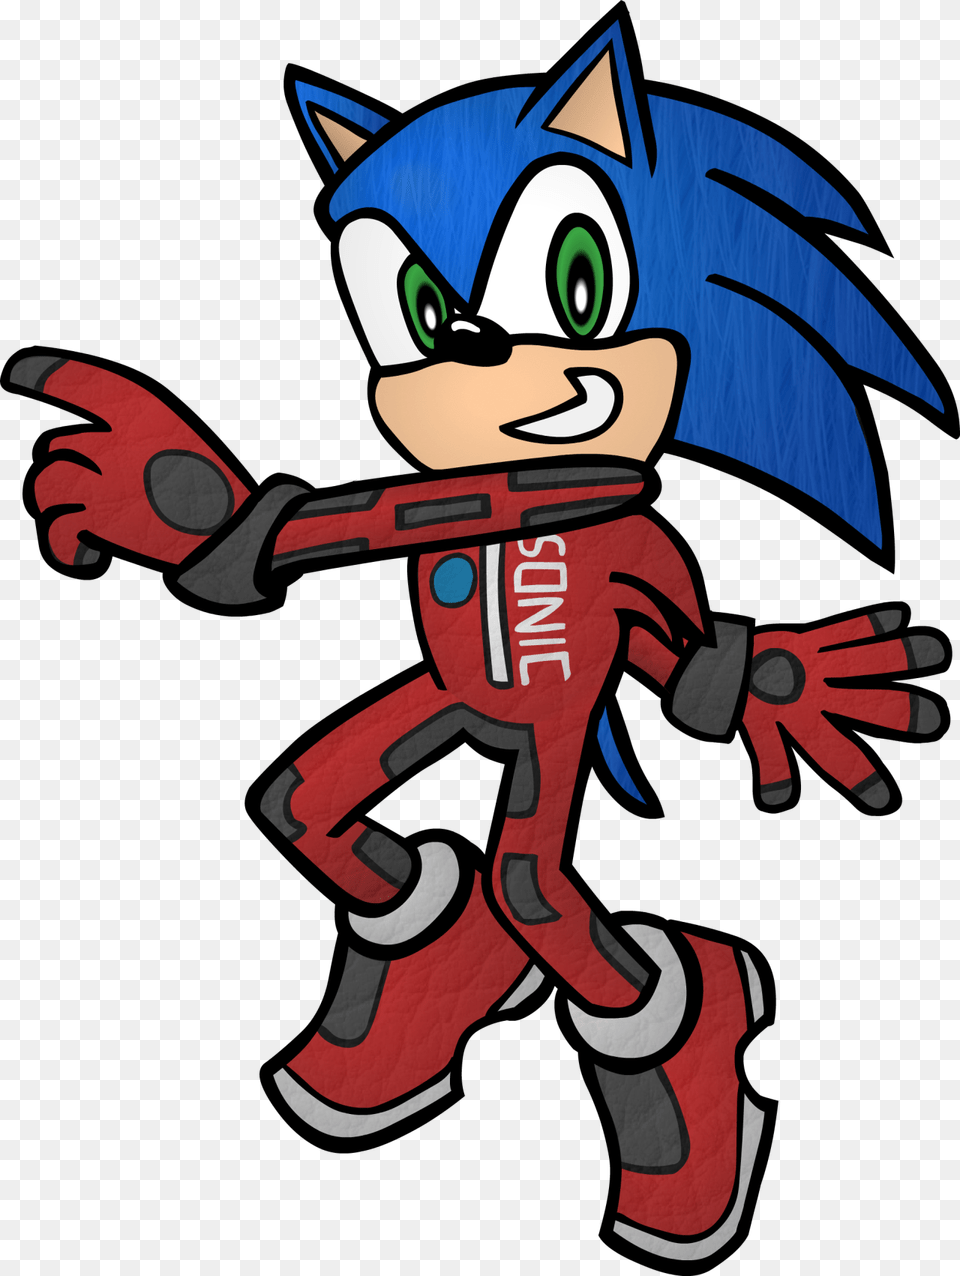 Sonic In His Racing Suit From Sonic Adventure, Book, Comics, Publication, Baby Png